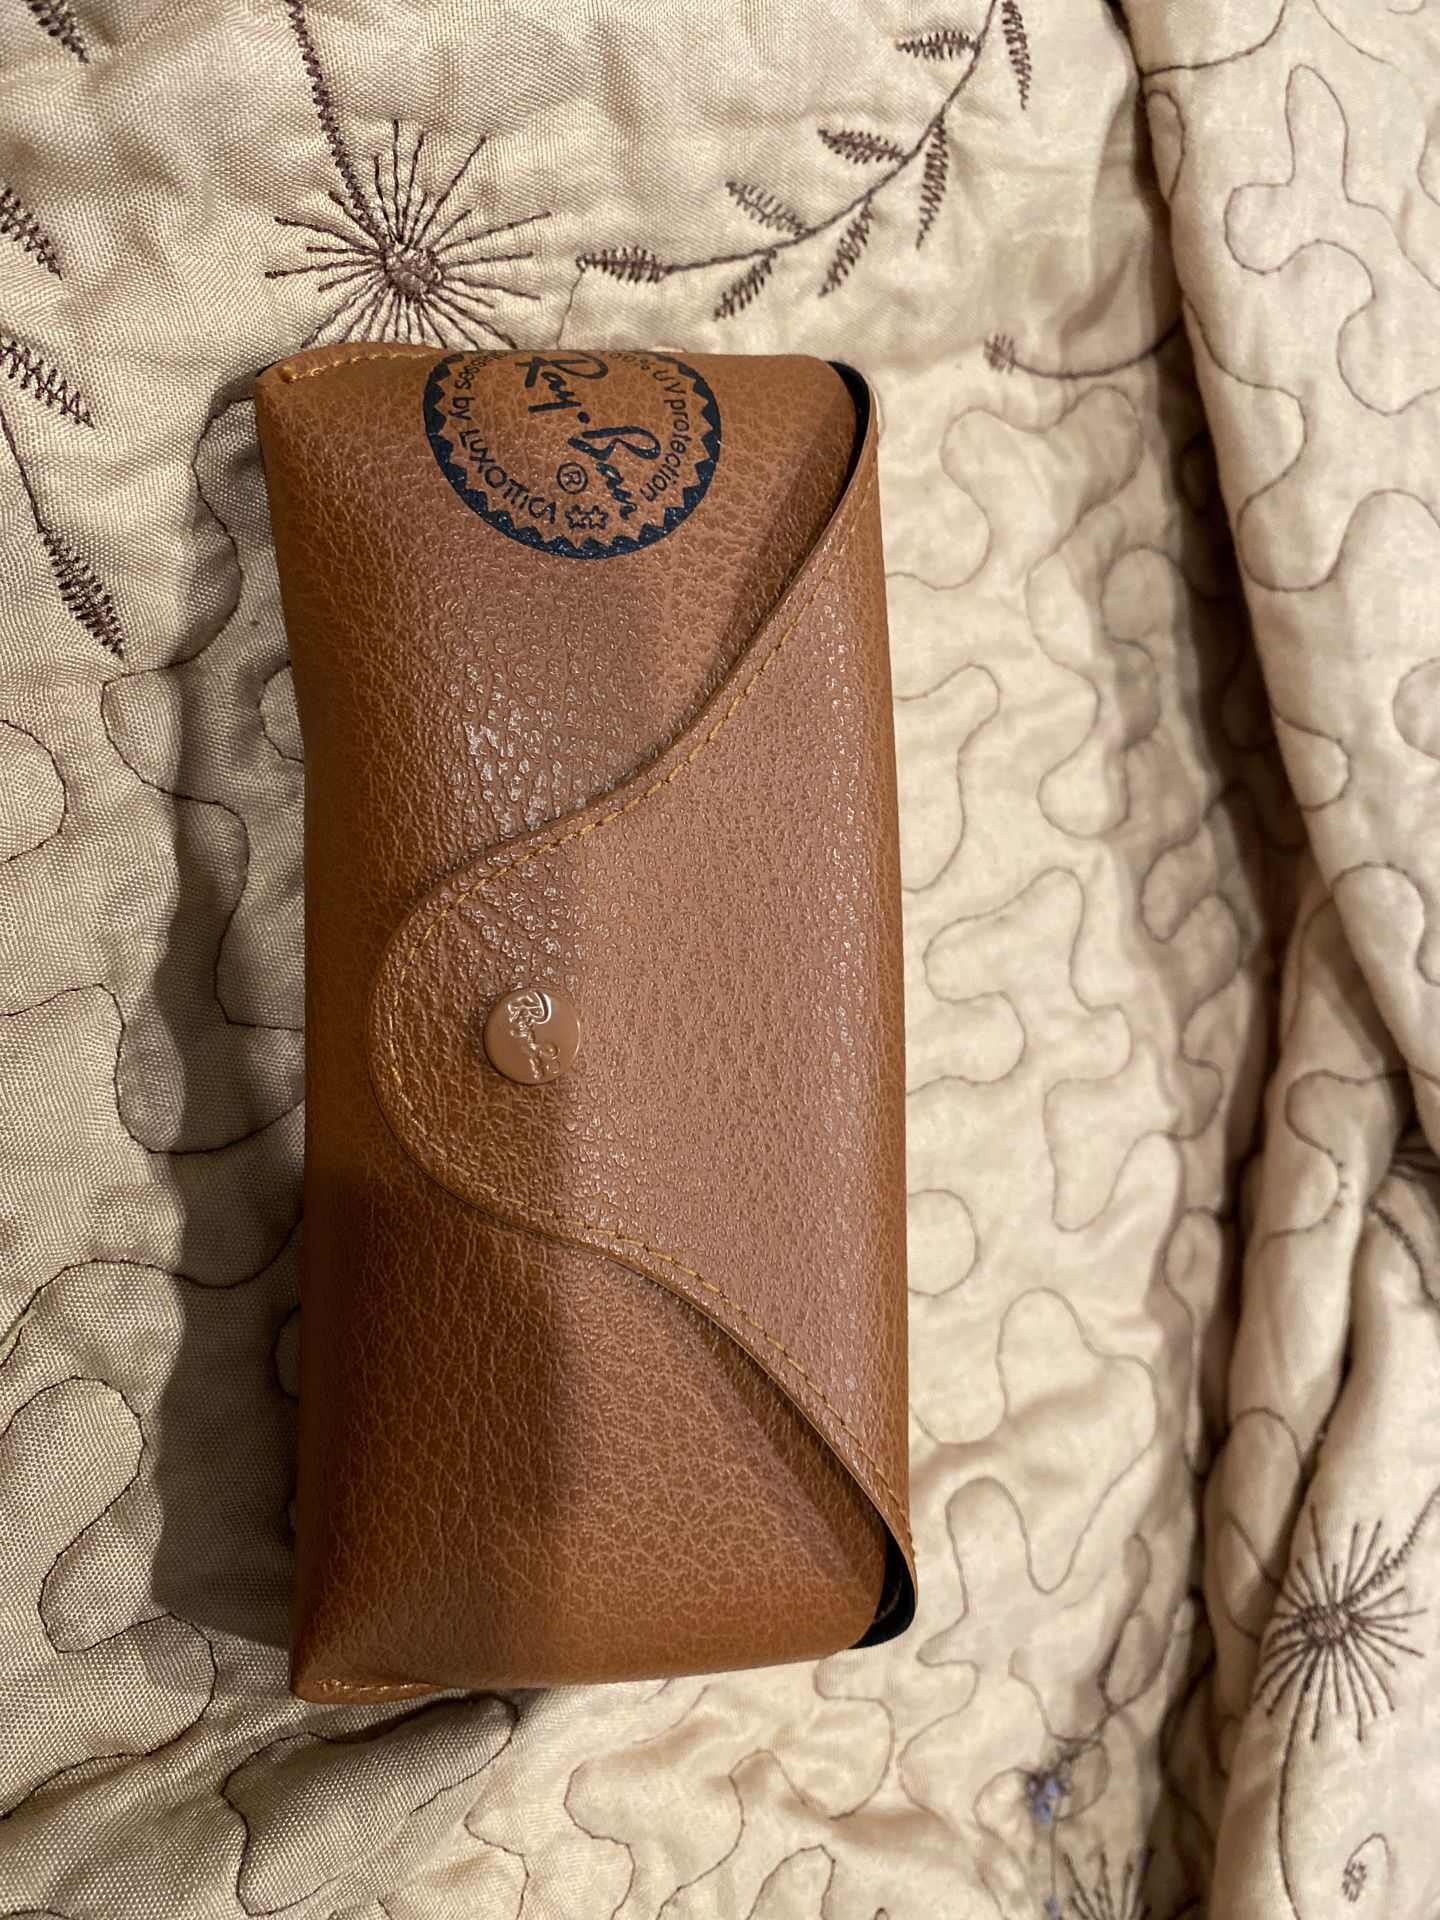 Ray bans glasses case